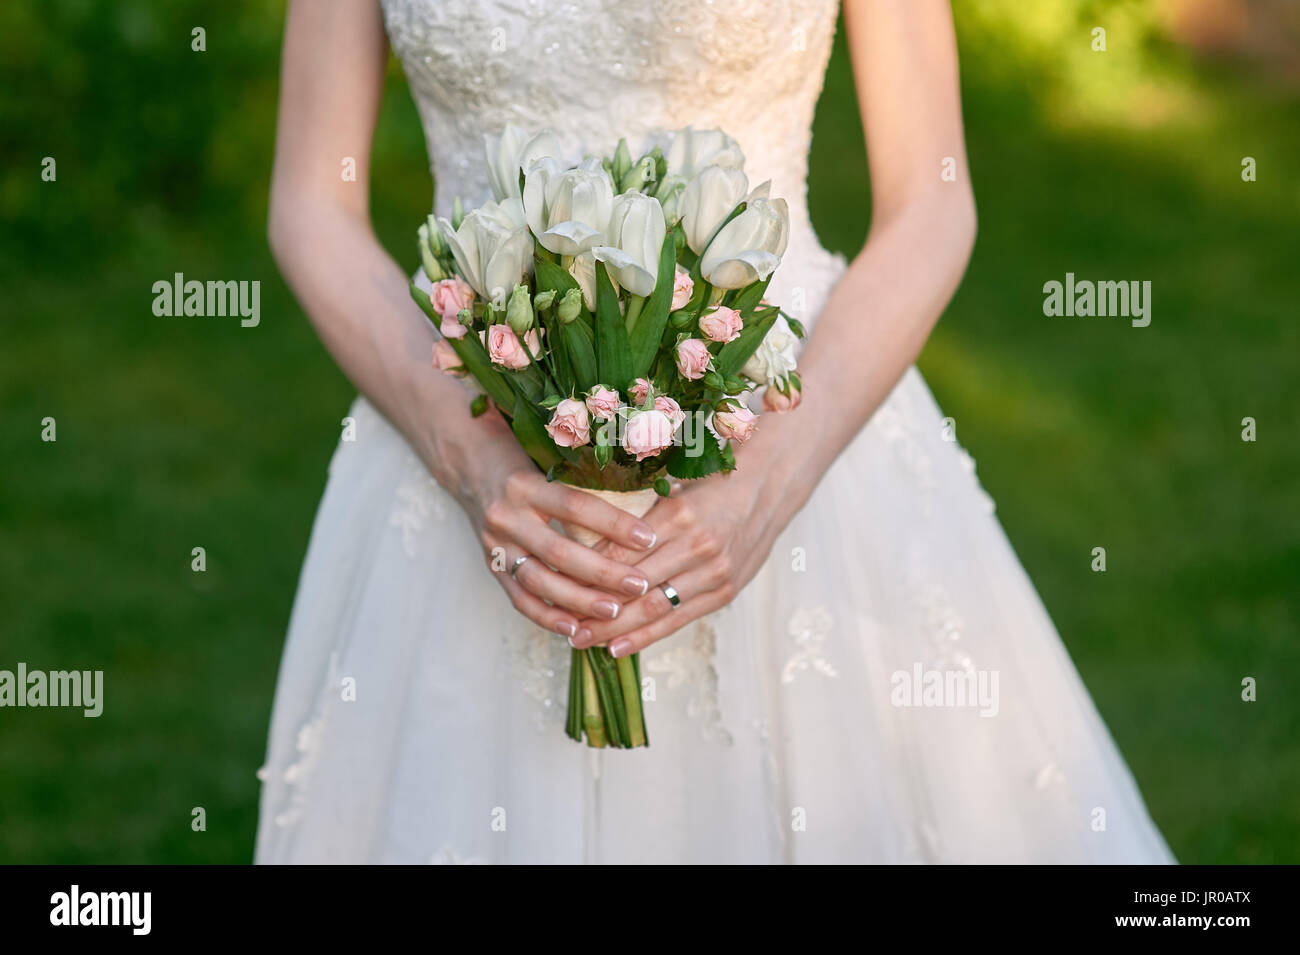 bride is holding a wedding bouquet of flowers Stock Photo